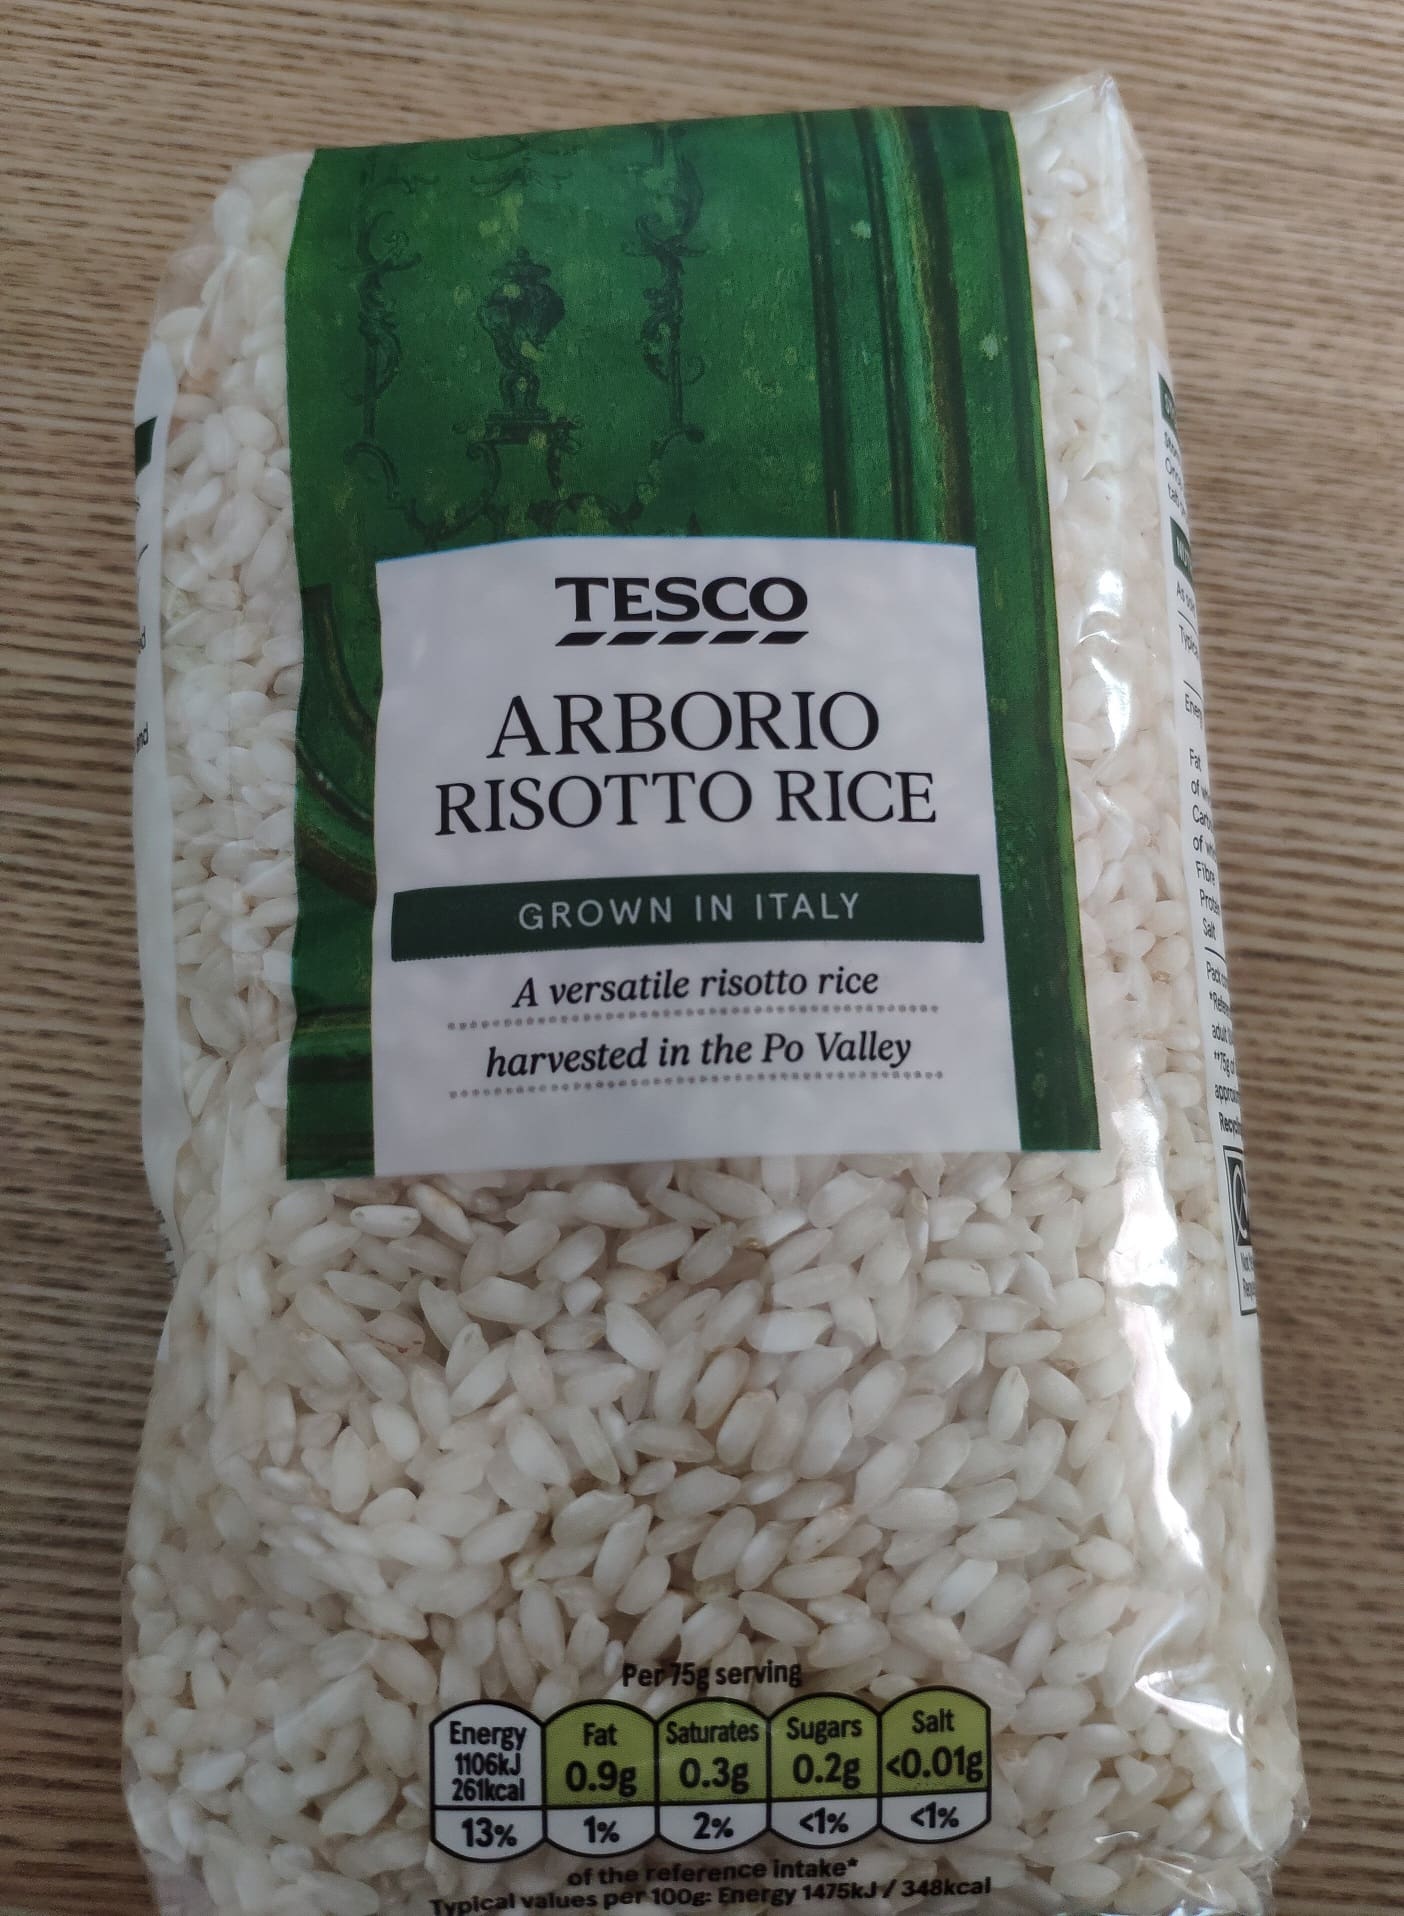 Washing Arborio Rice Before Cooking: Is it Necessary?